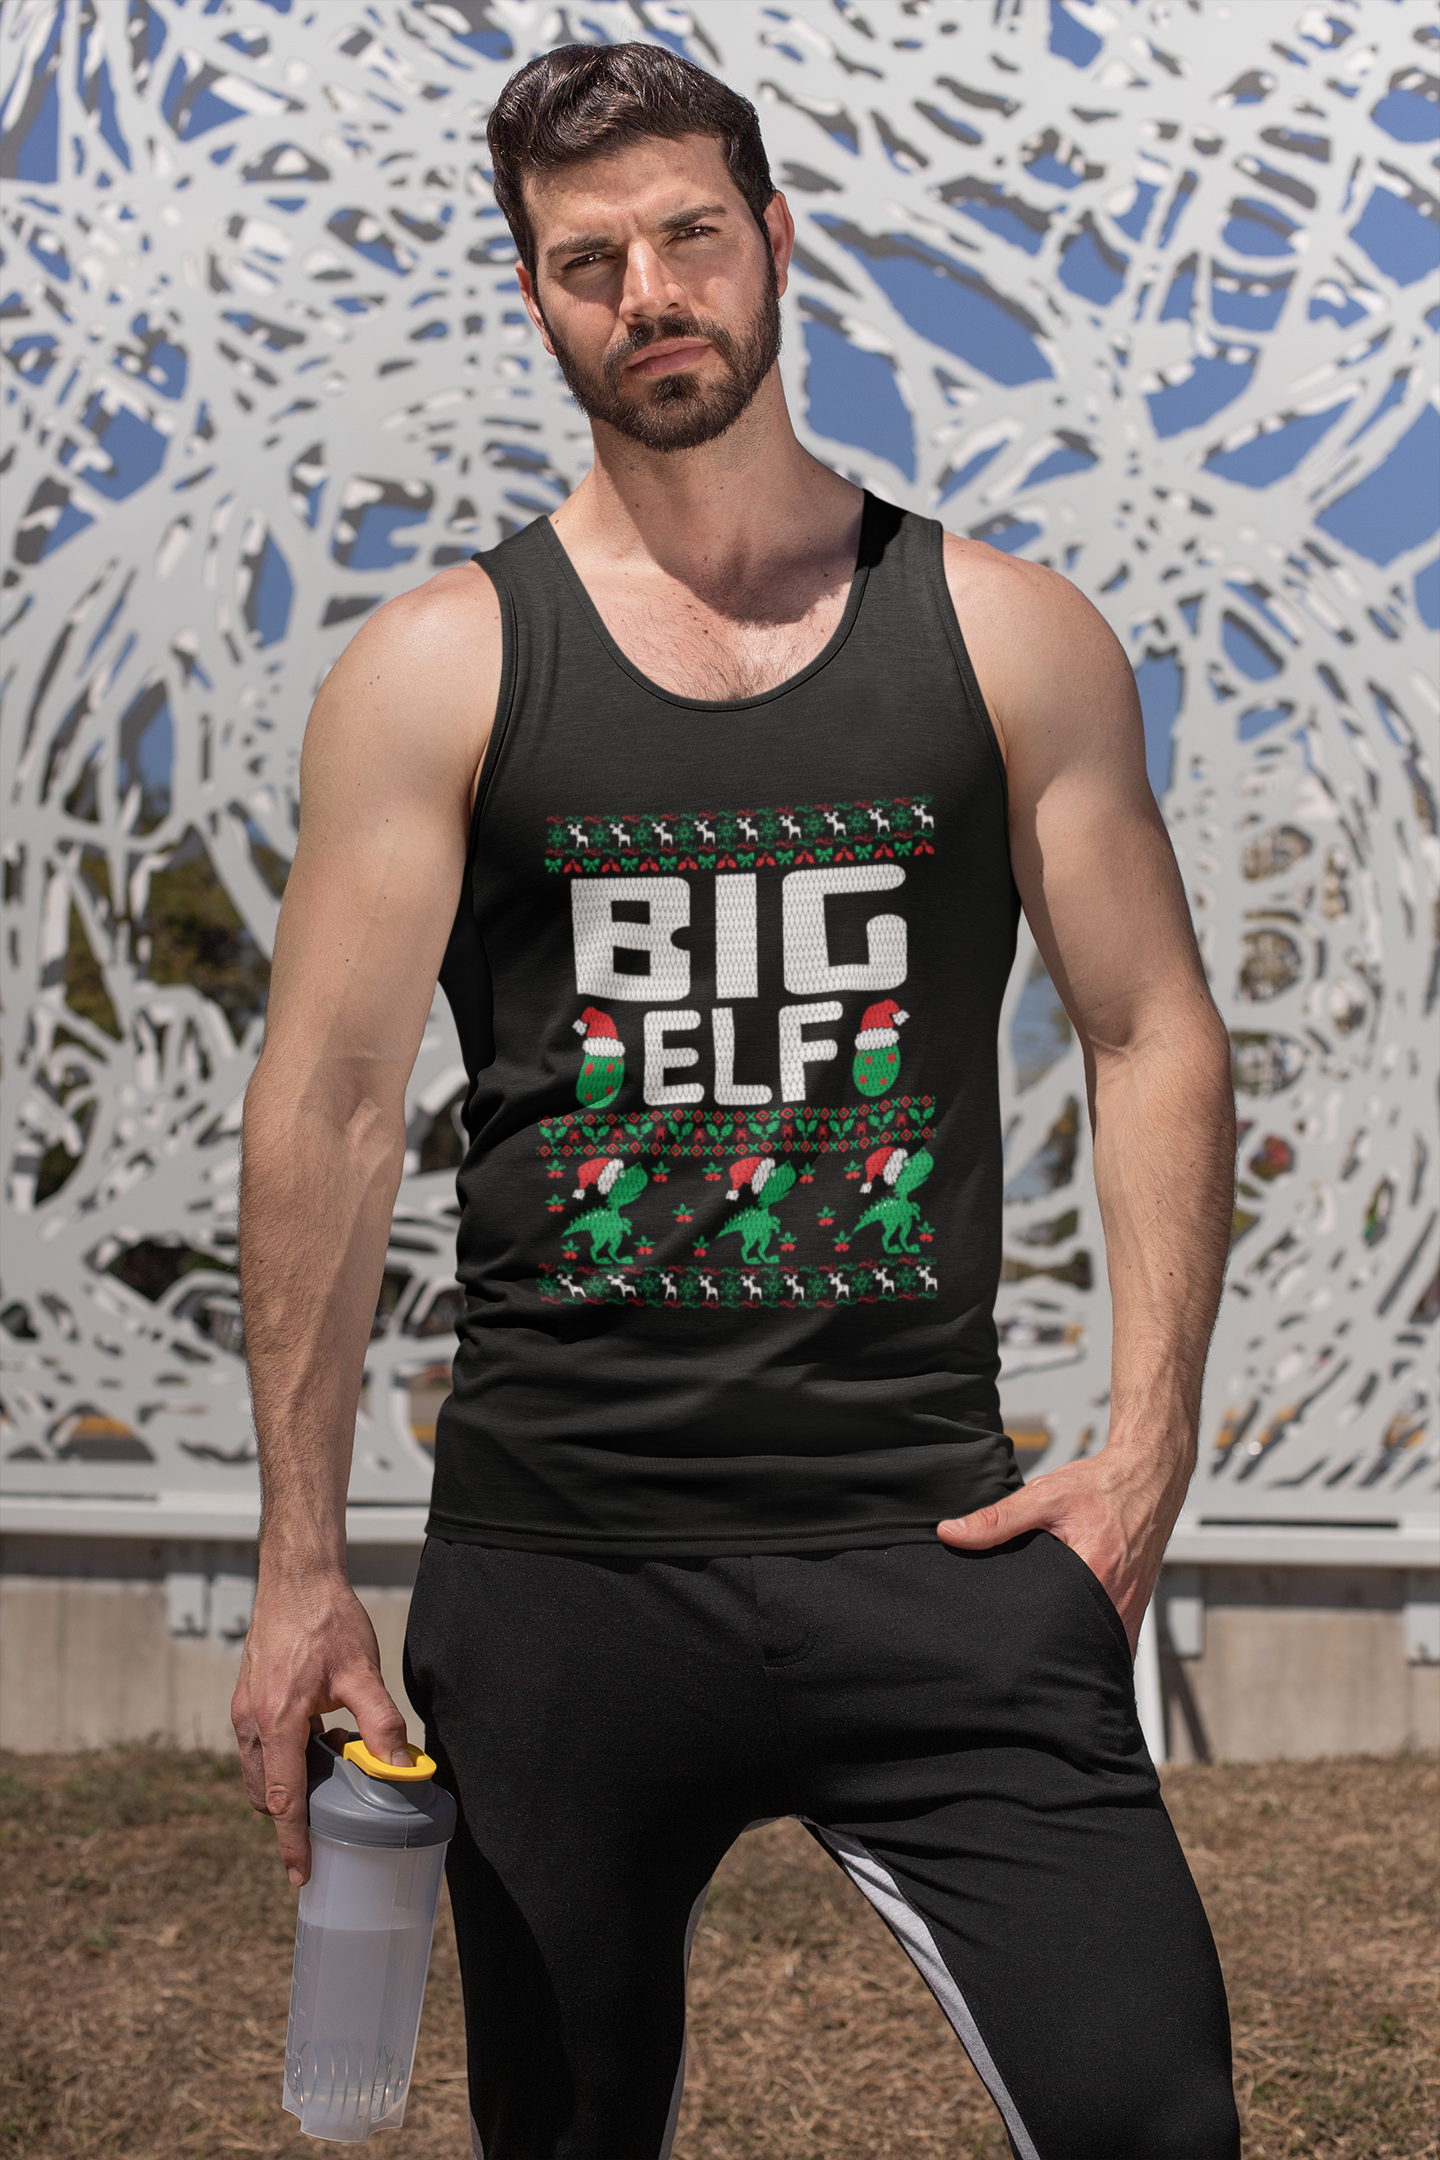 Swole Tank Top Bodybuilding Gift Fitness Shirts Fitness Tank Top